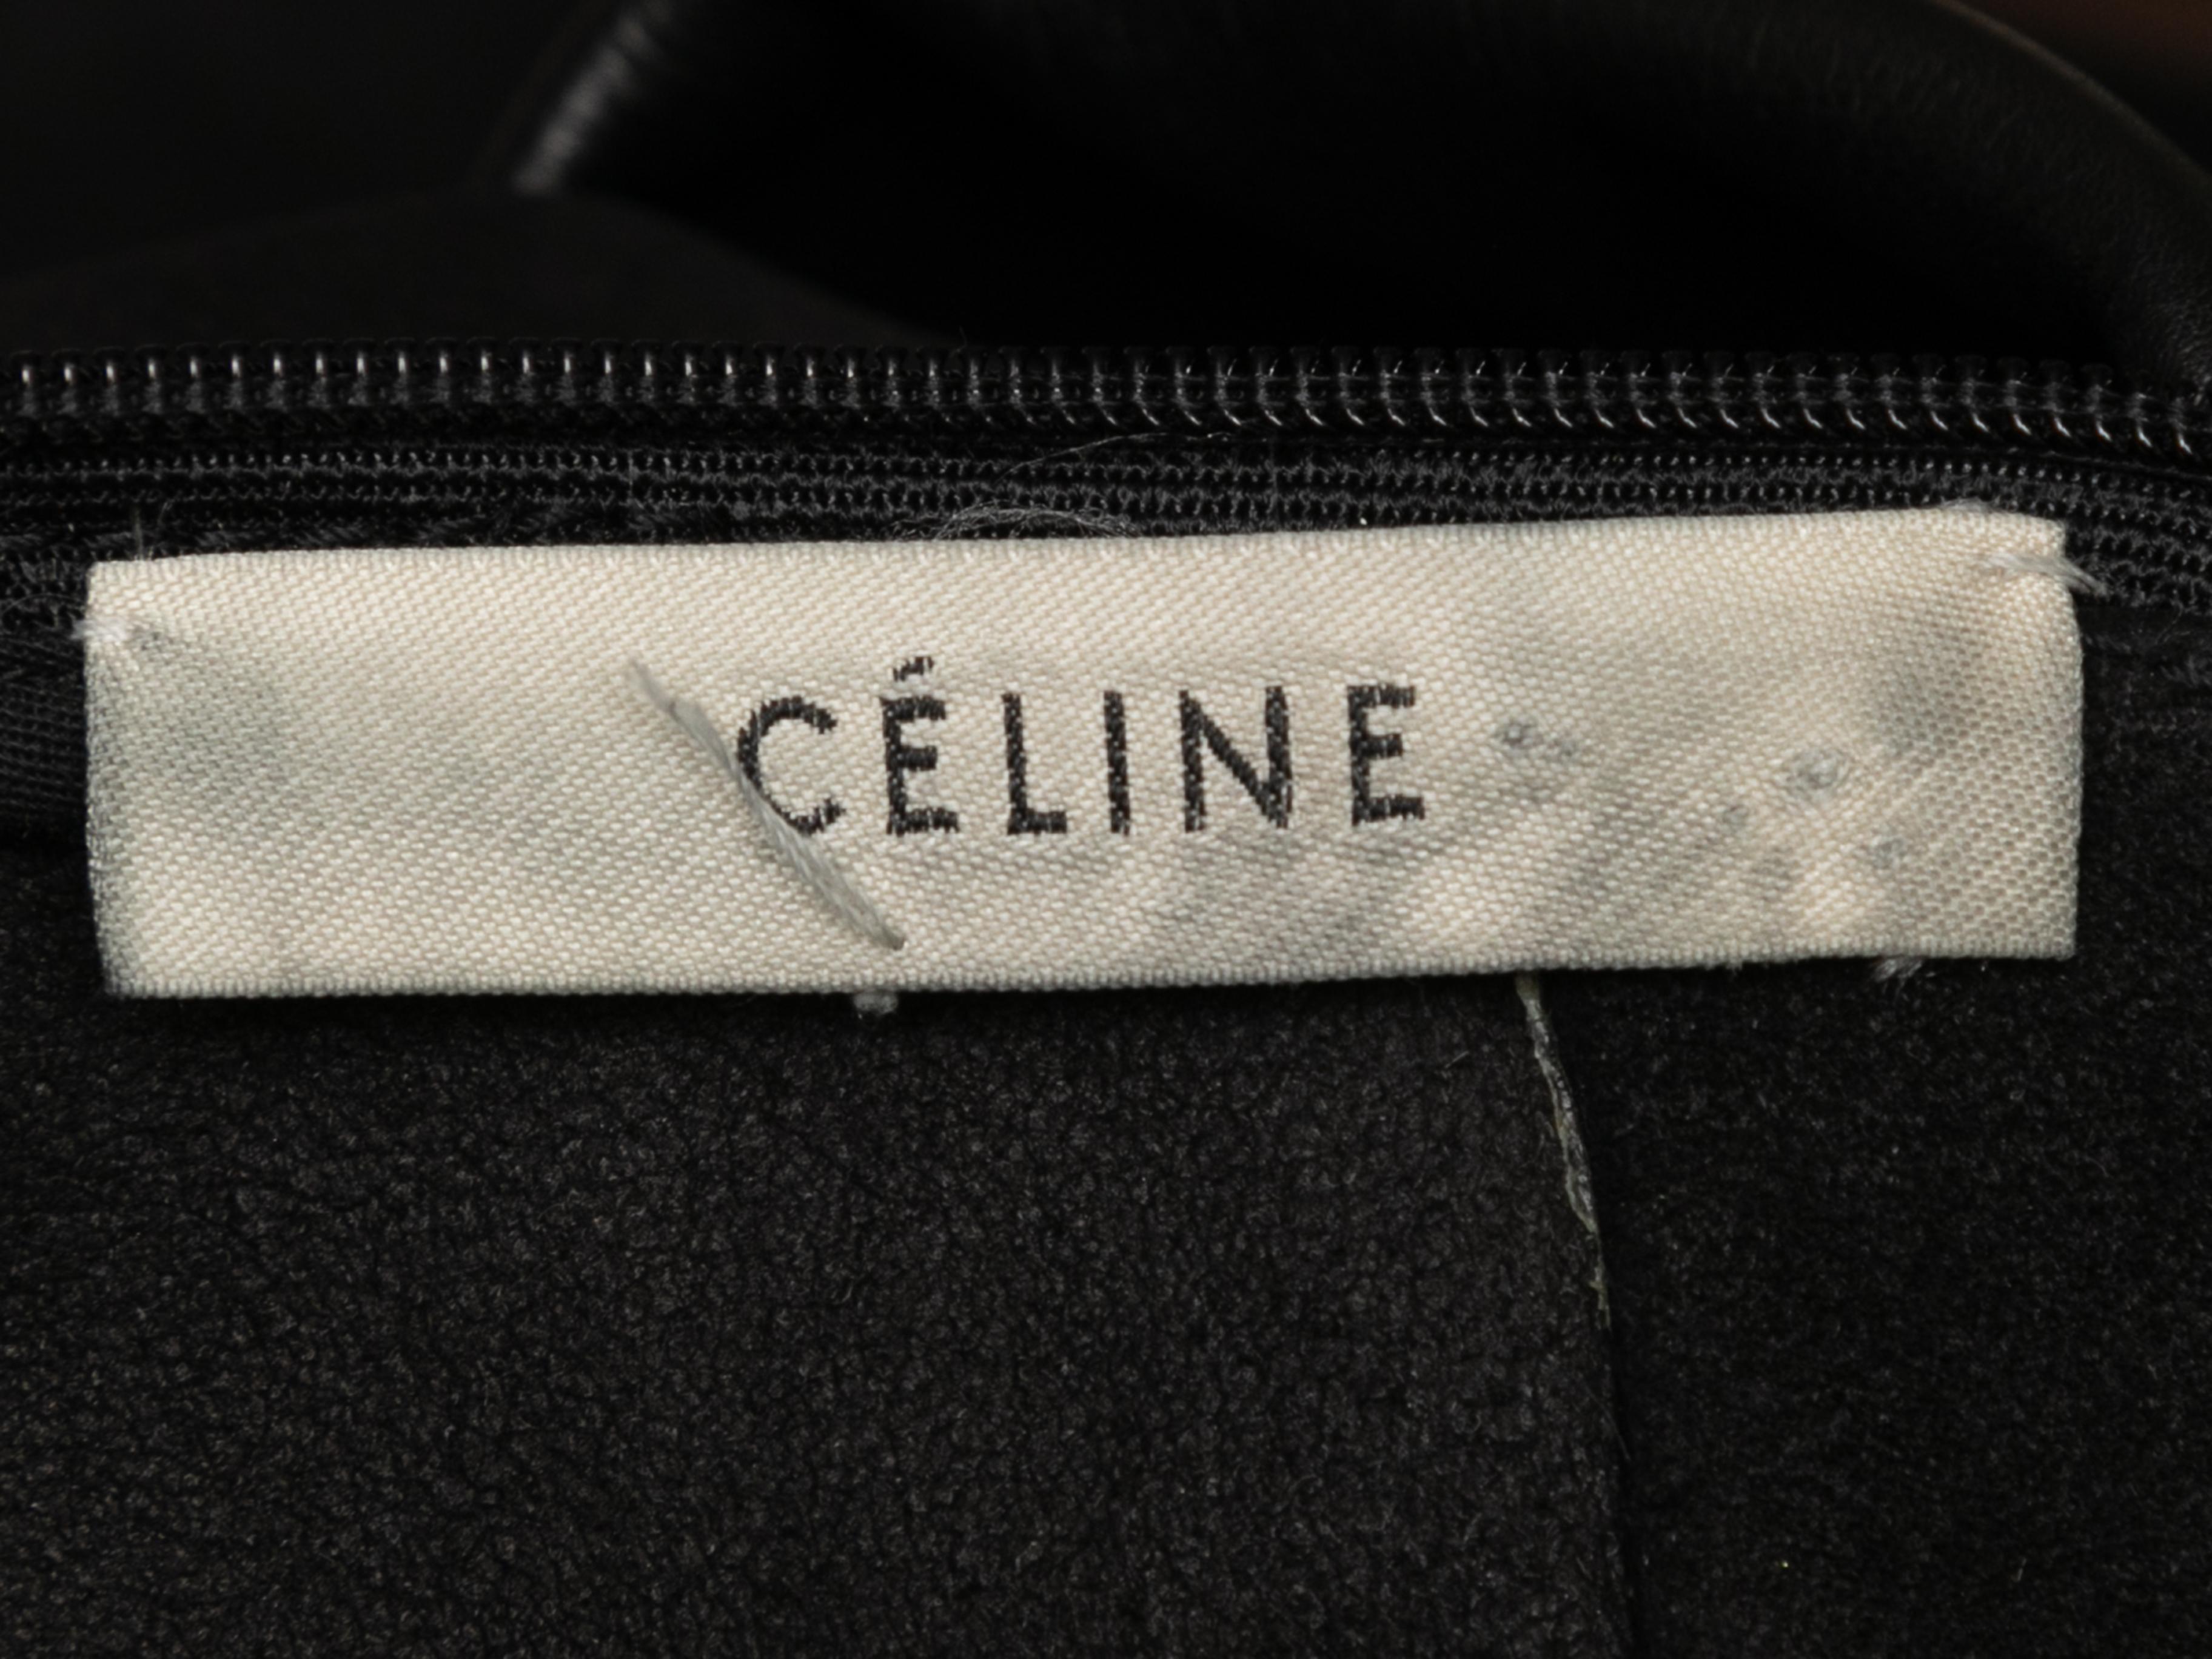 Black suede and leather dress by Celine. From the Phoebe Philo Era. Crew neck. Long sleeves. Zip closure at center back. 34